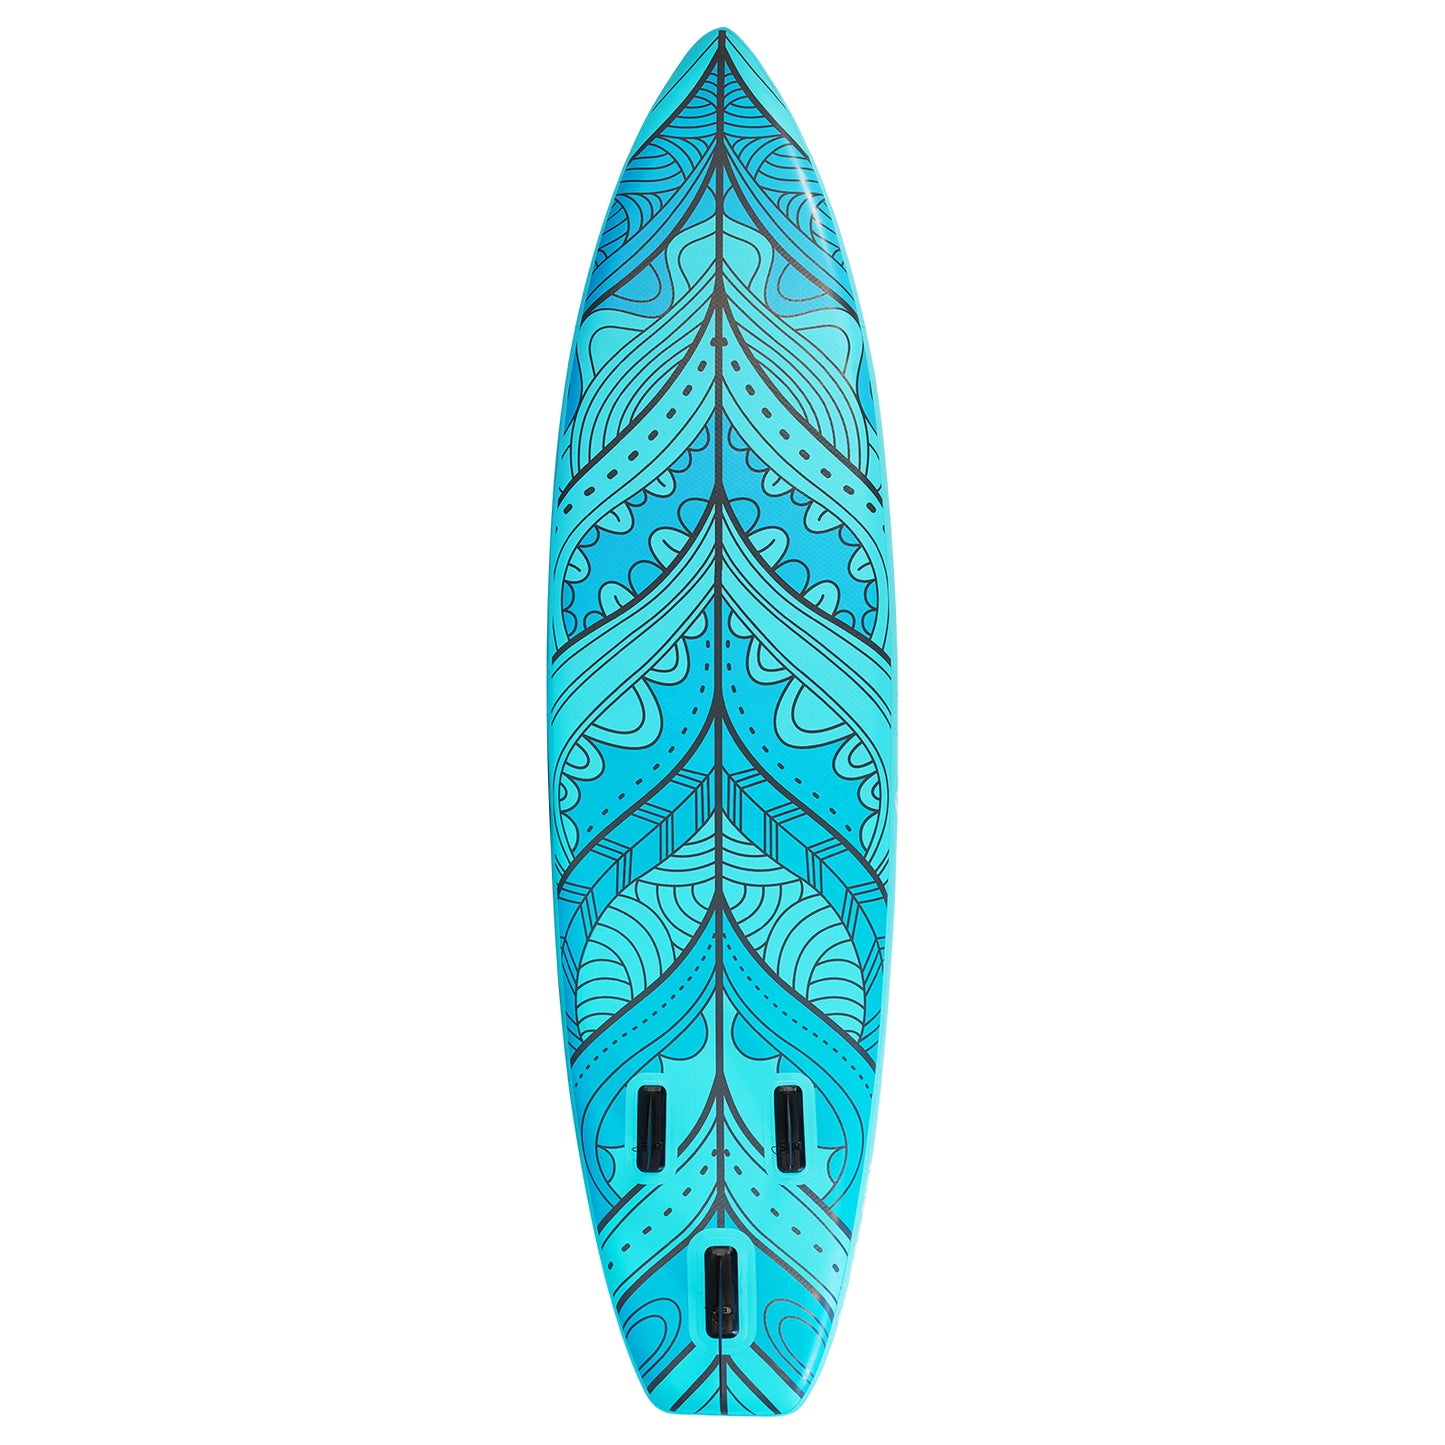 10.6ft Blue Patterned Paddleboard with Accessories